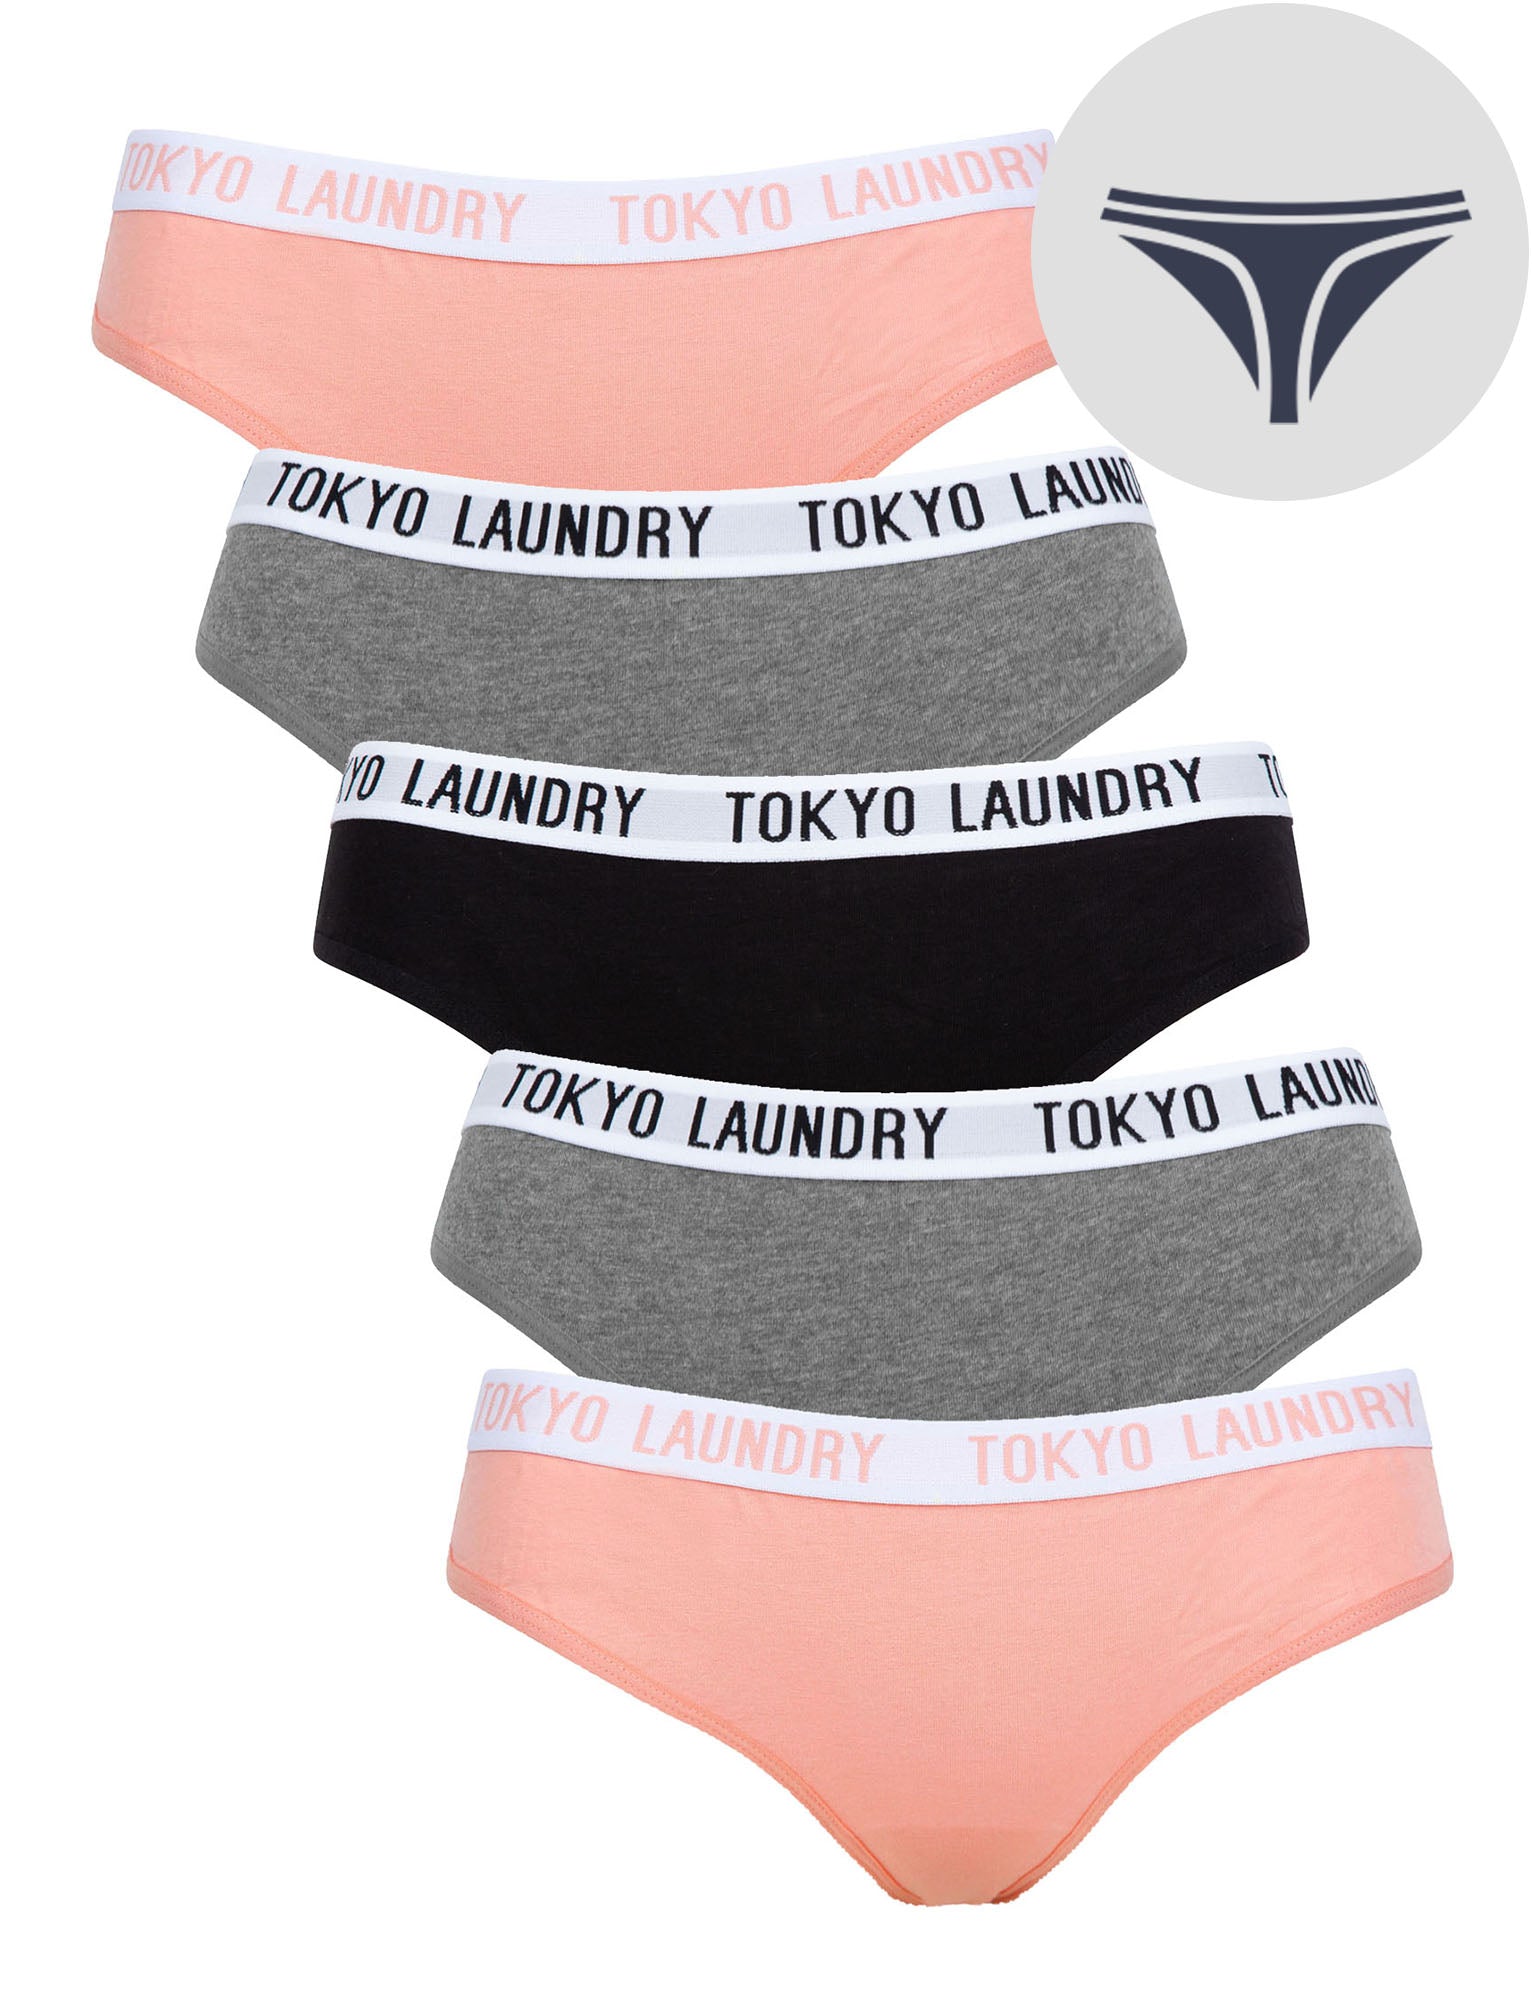 Womens Underwear Milla (5 Pack) Cotton Assorted Thongs in Bridal Rose / Mid Grey Marl / Jet Black - Tokyo Laundry / M - Tokyo Laundry